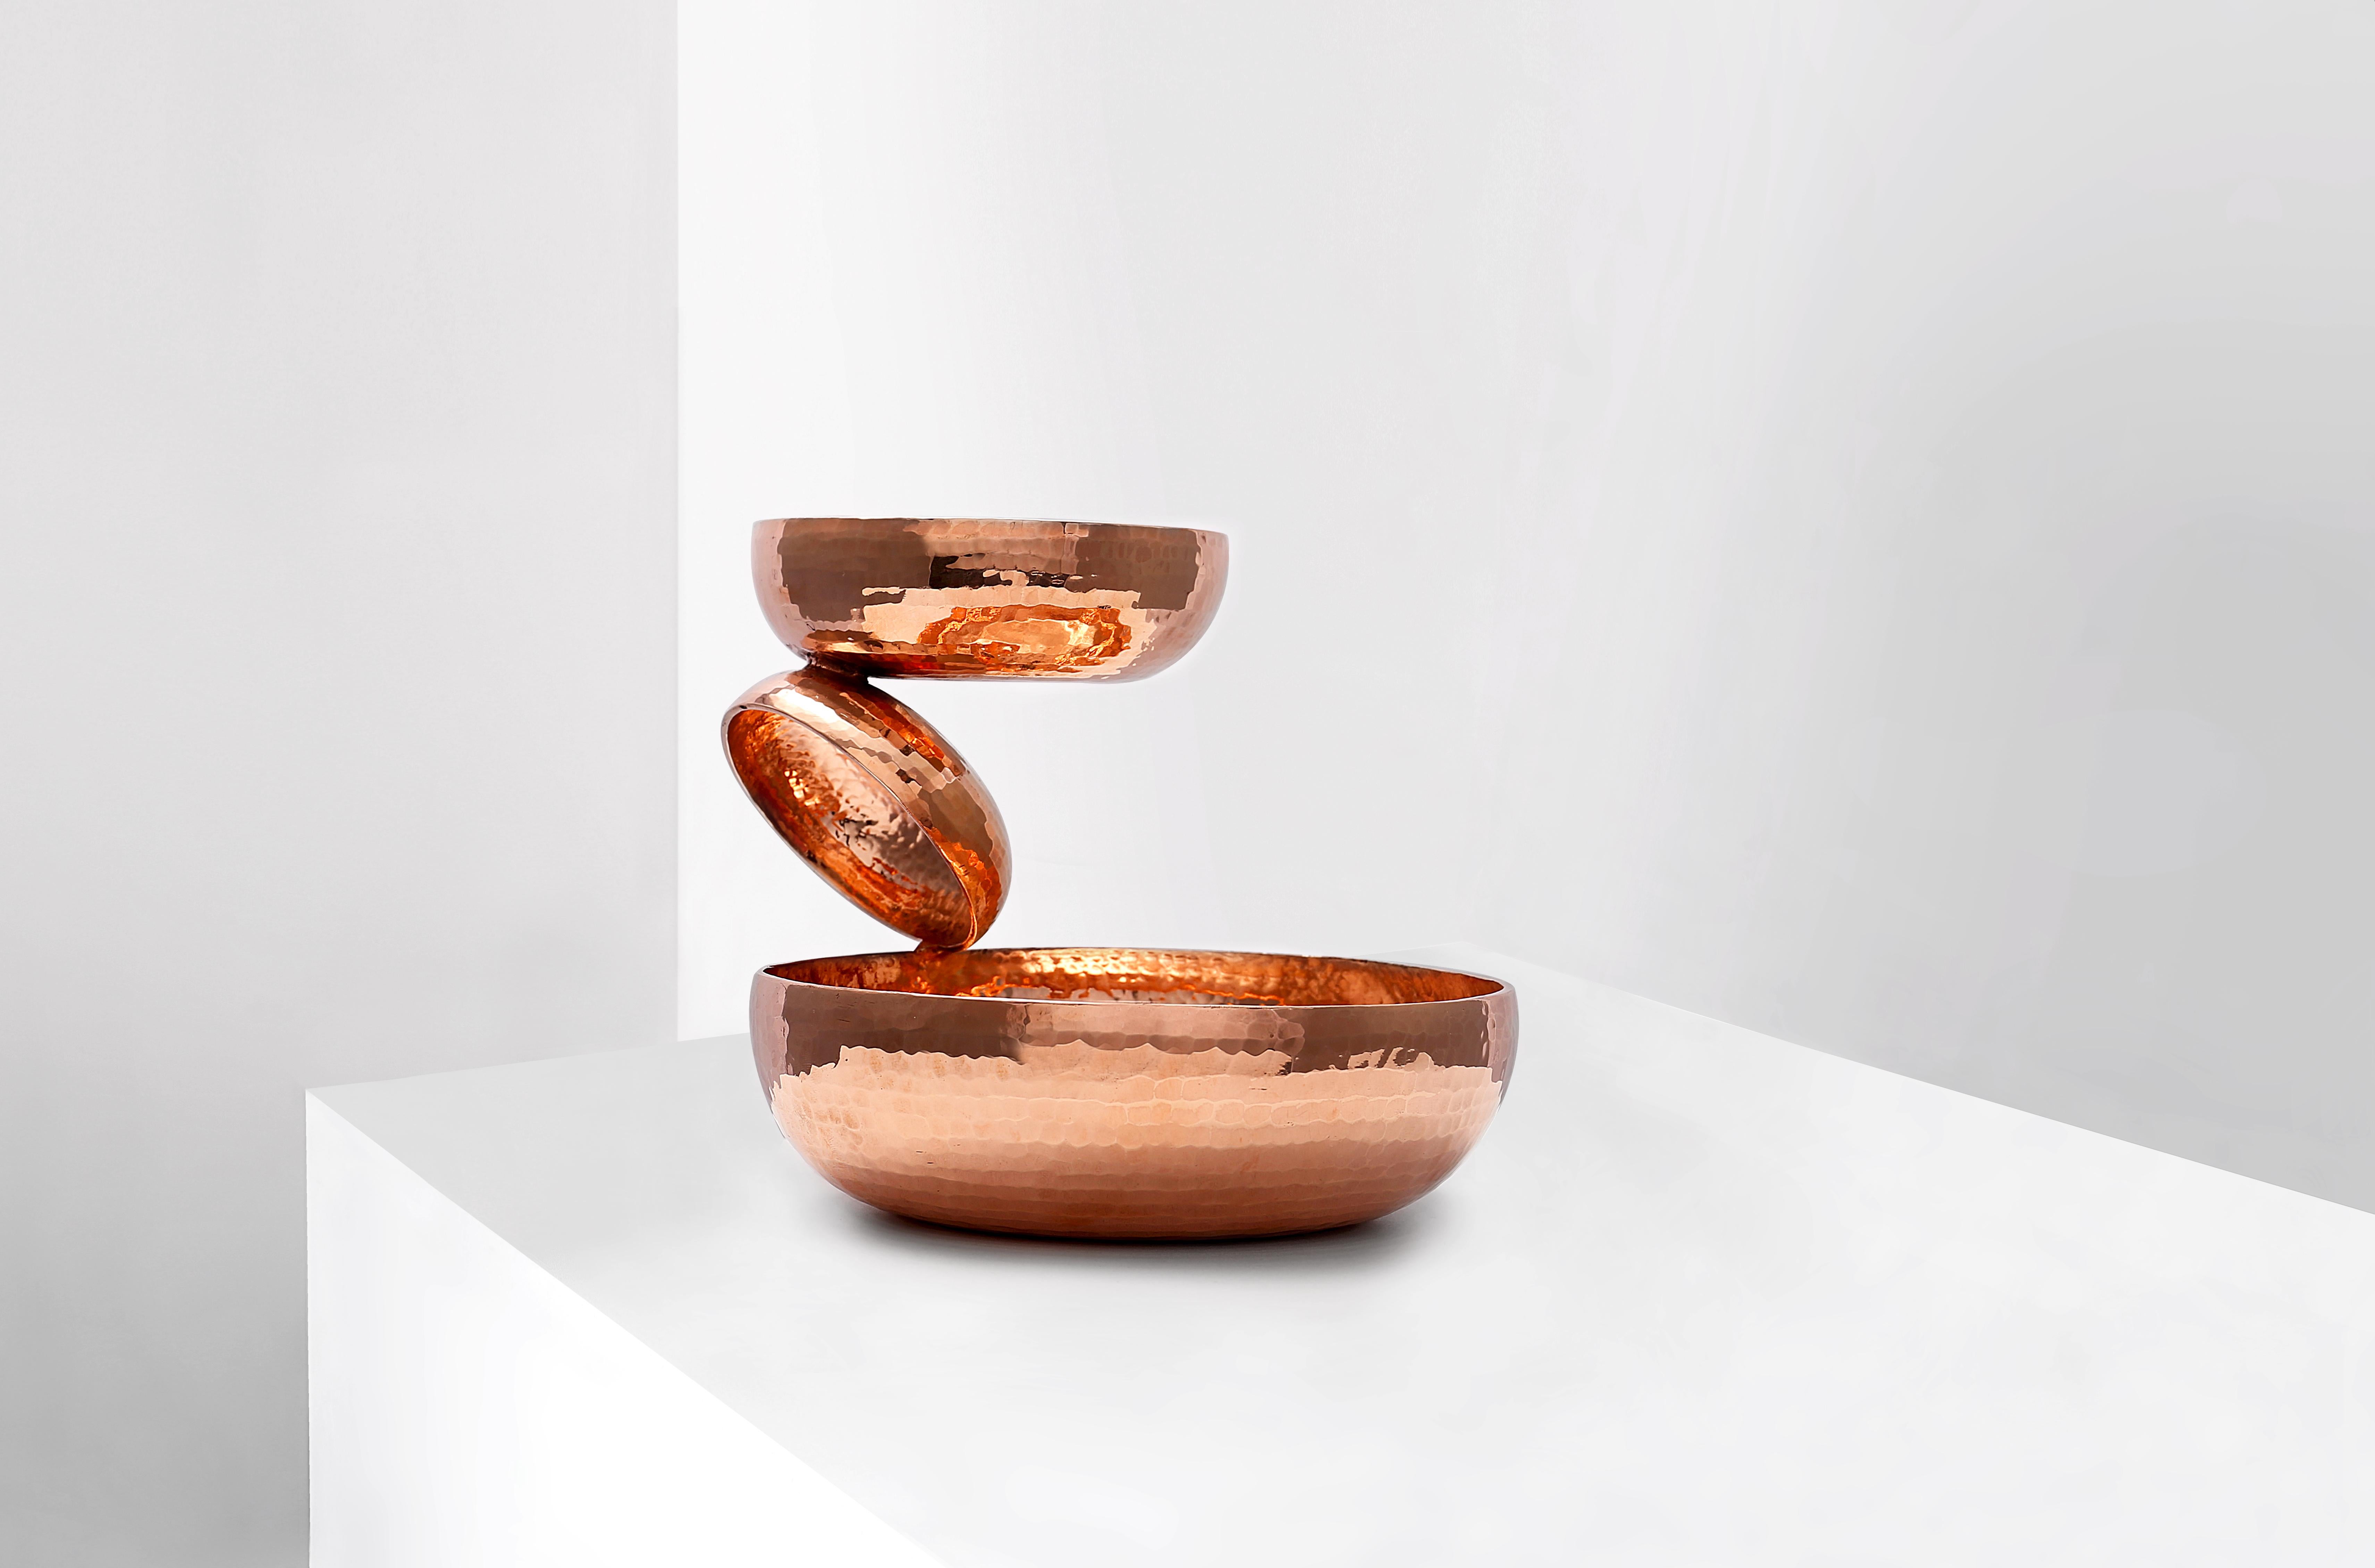 Copper balance bowls by Joel Escalona
Dimensions: D 70 x W 40 x H 60 cm
Materials: Copper
Also available in different dimensions and materials.

We met Napoleon in Santa Clara del Cobre due to a project we carried out for the Museum of Popular